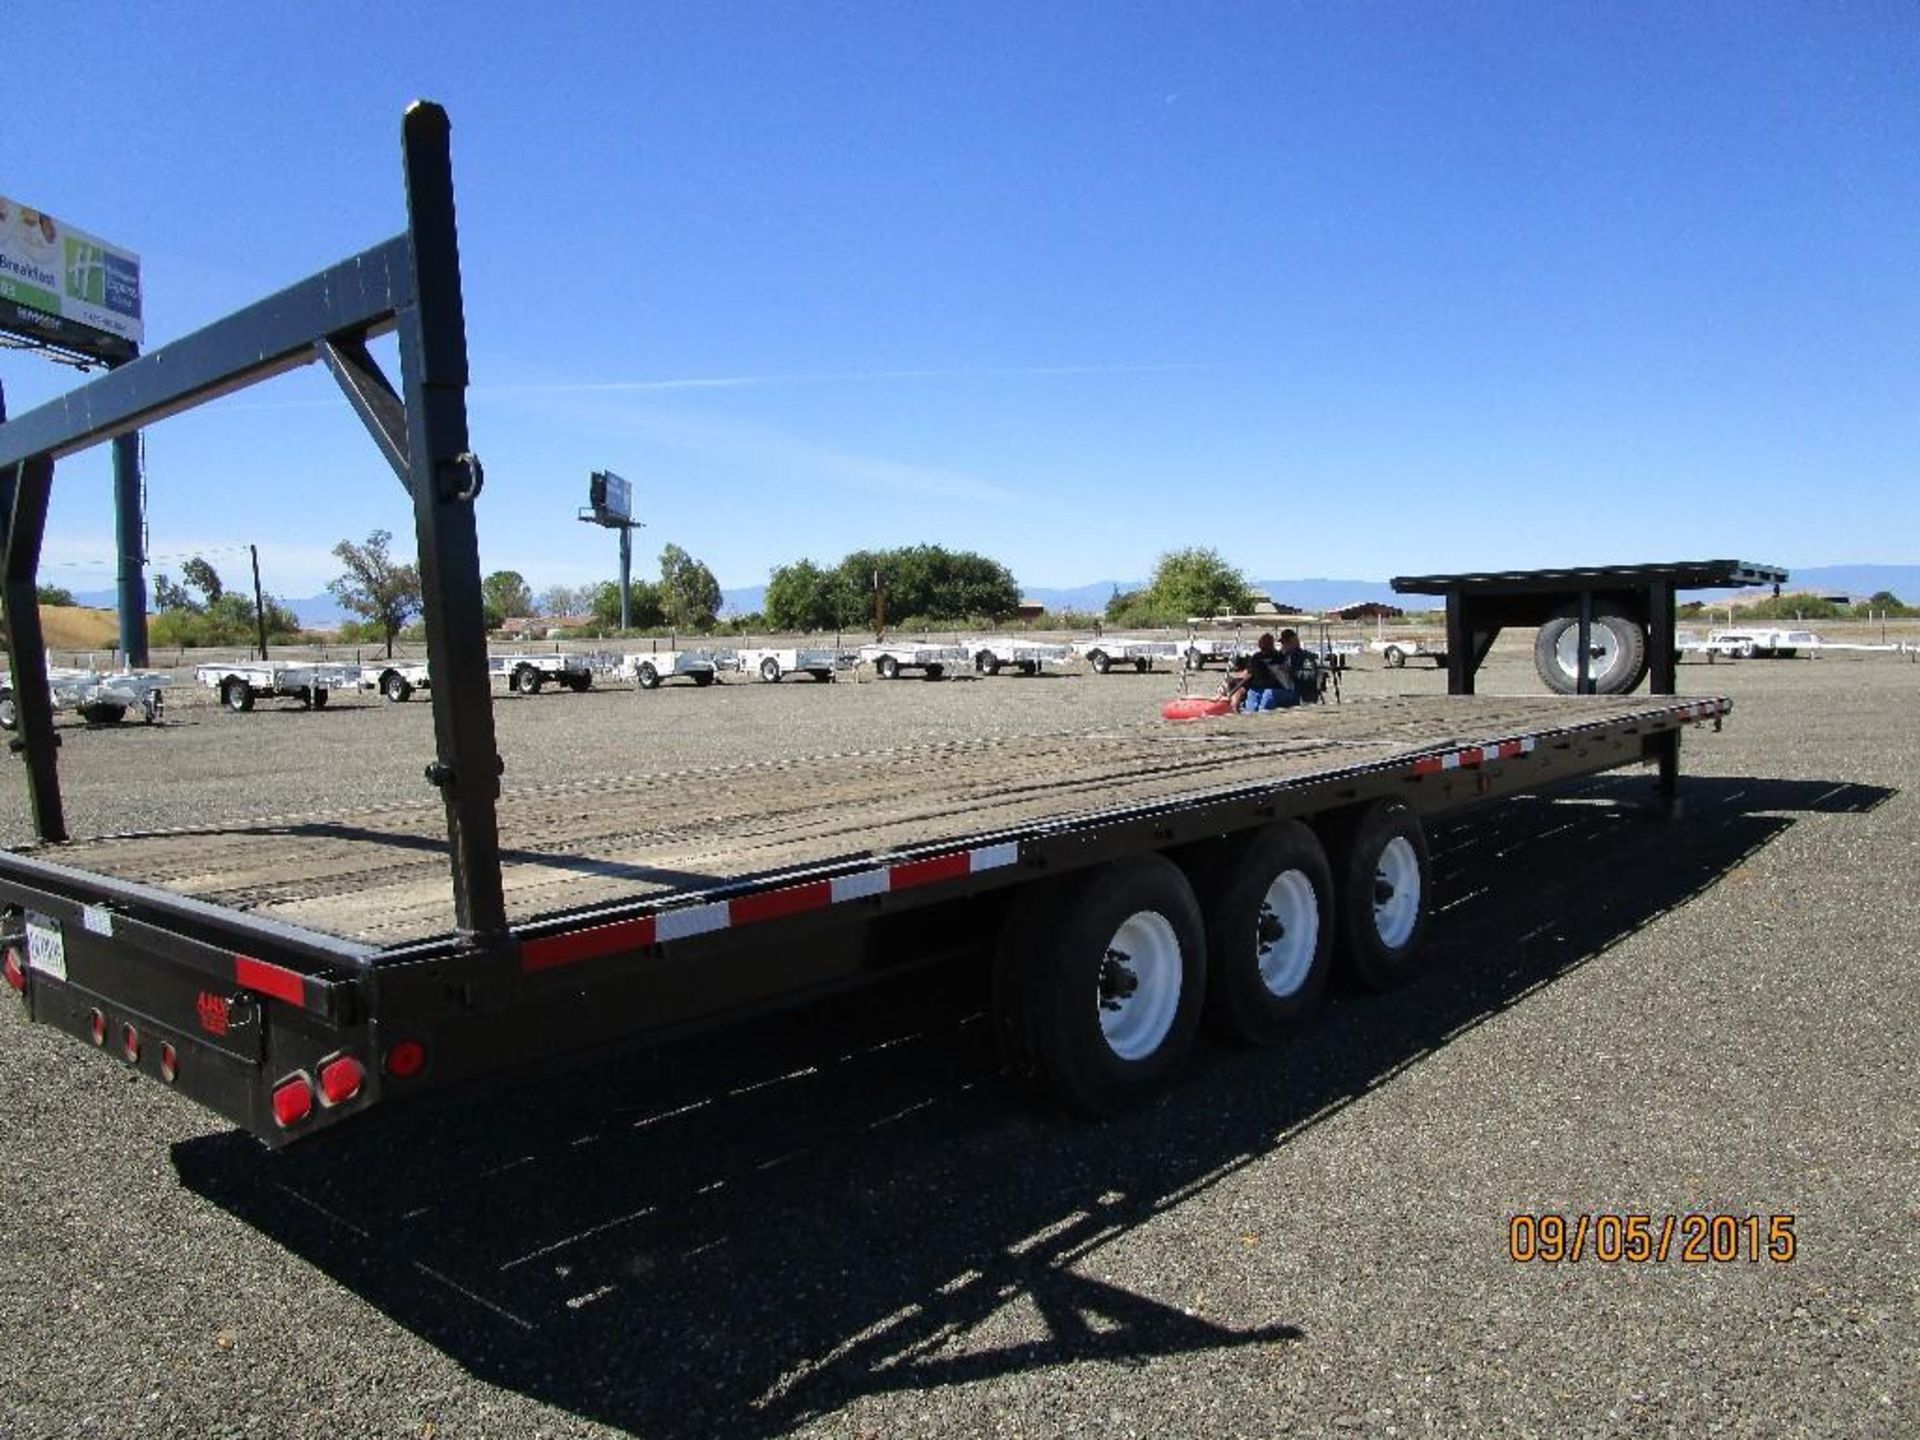 Wood Deck, Bottom 32', Top 8' GVWR 24,000 lbs. Equipped with: Stake Pockets Electric Brakes Tires - Image 4 of 8